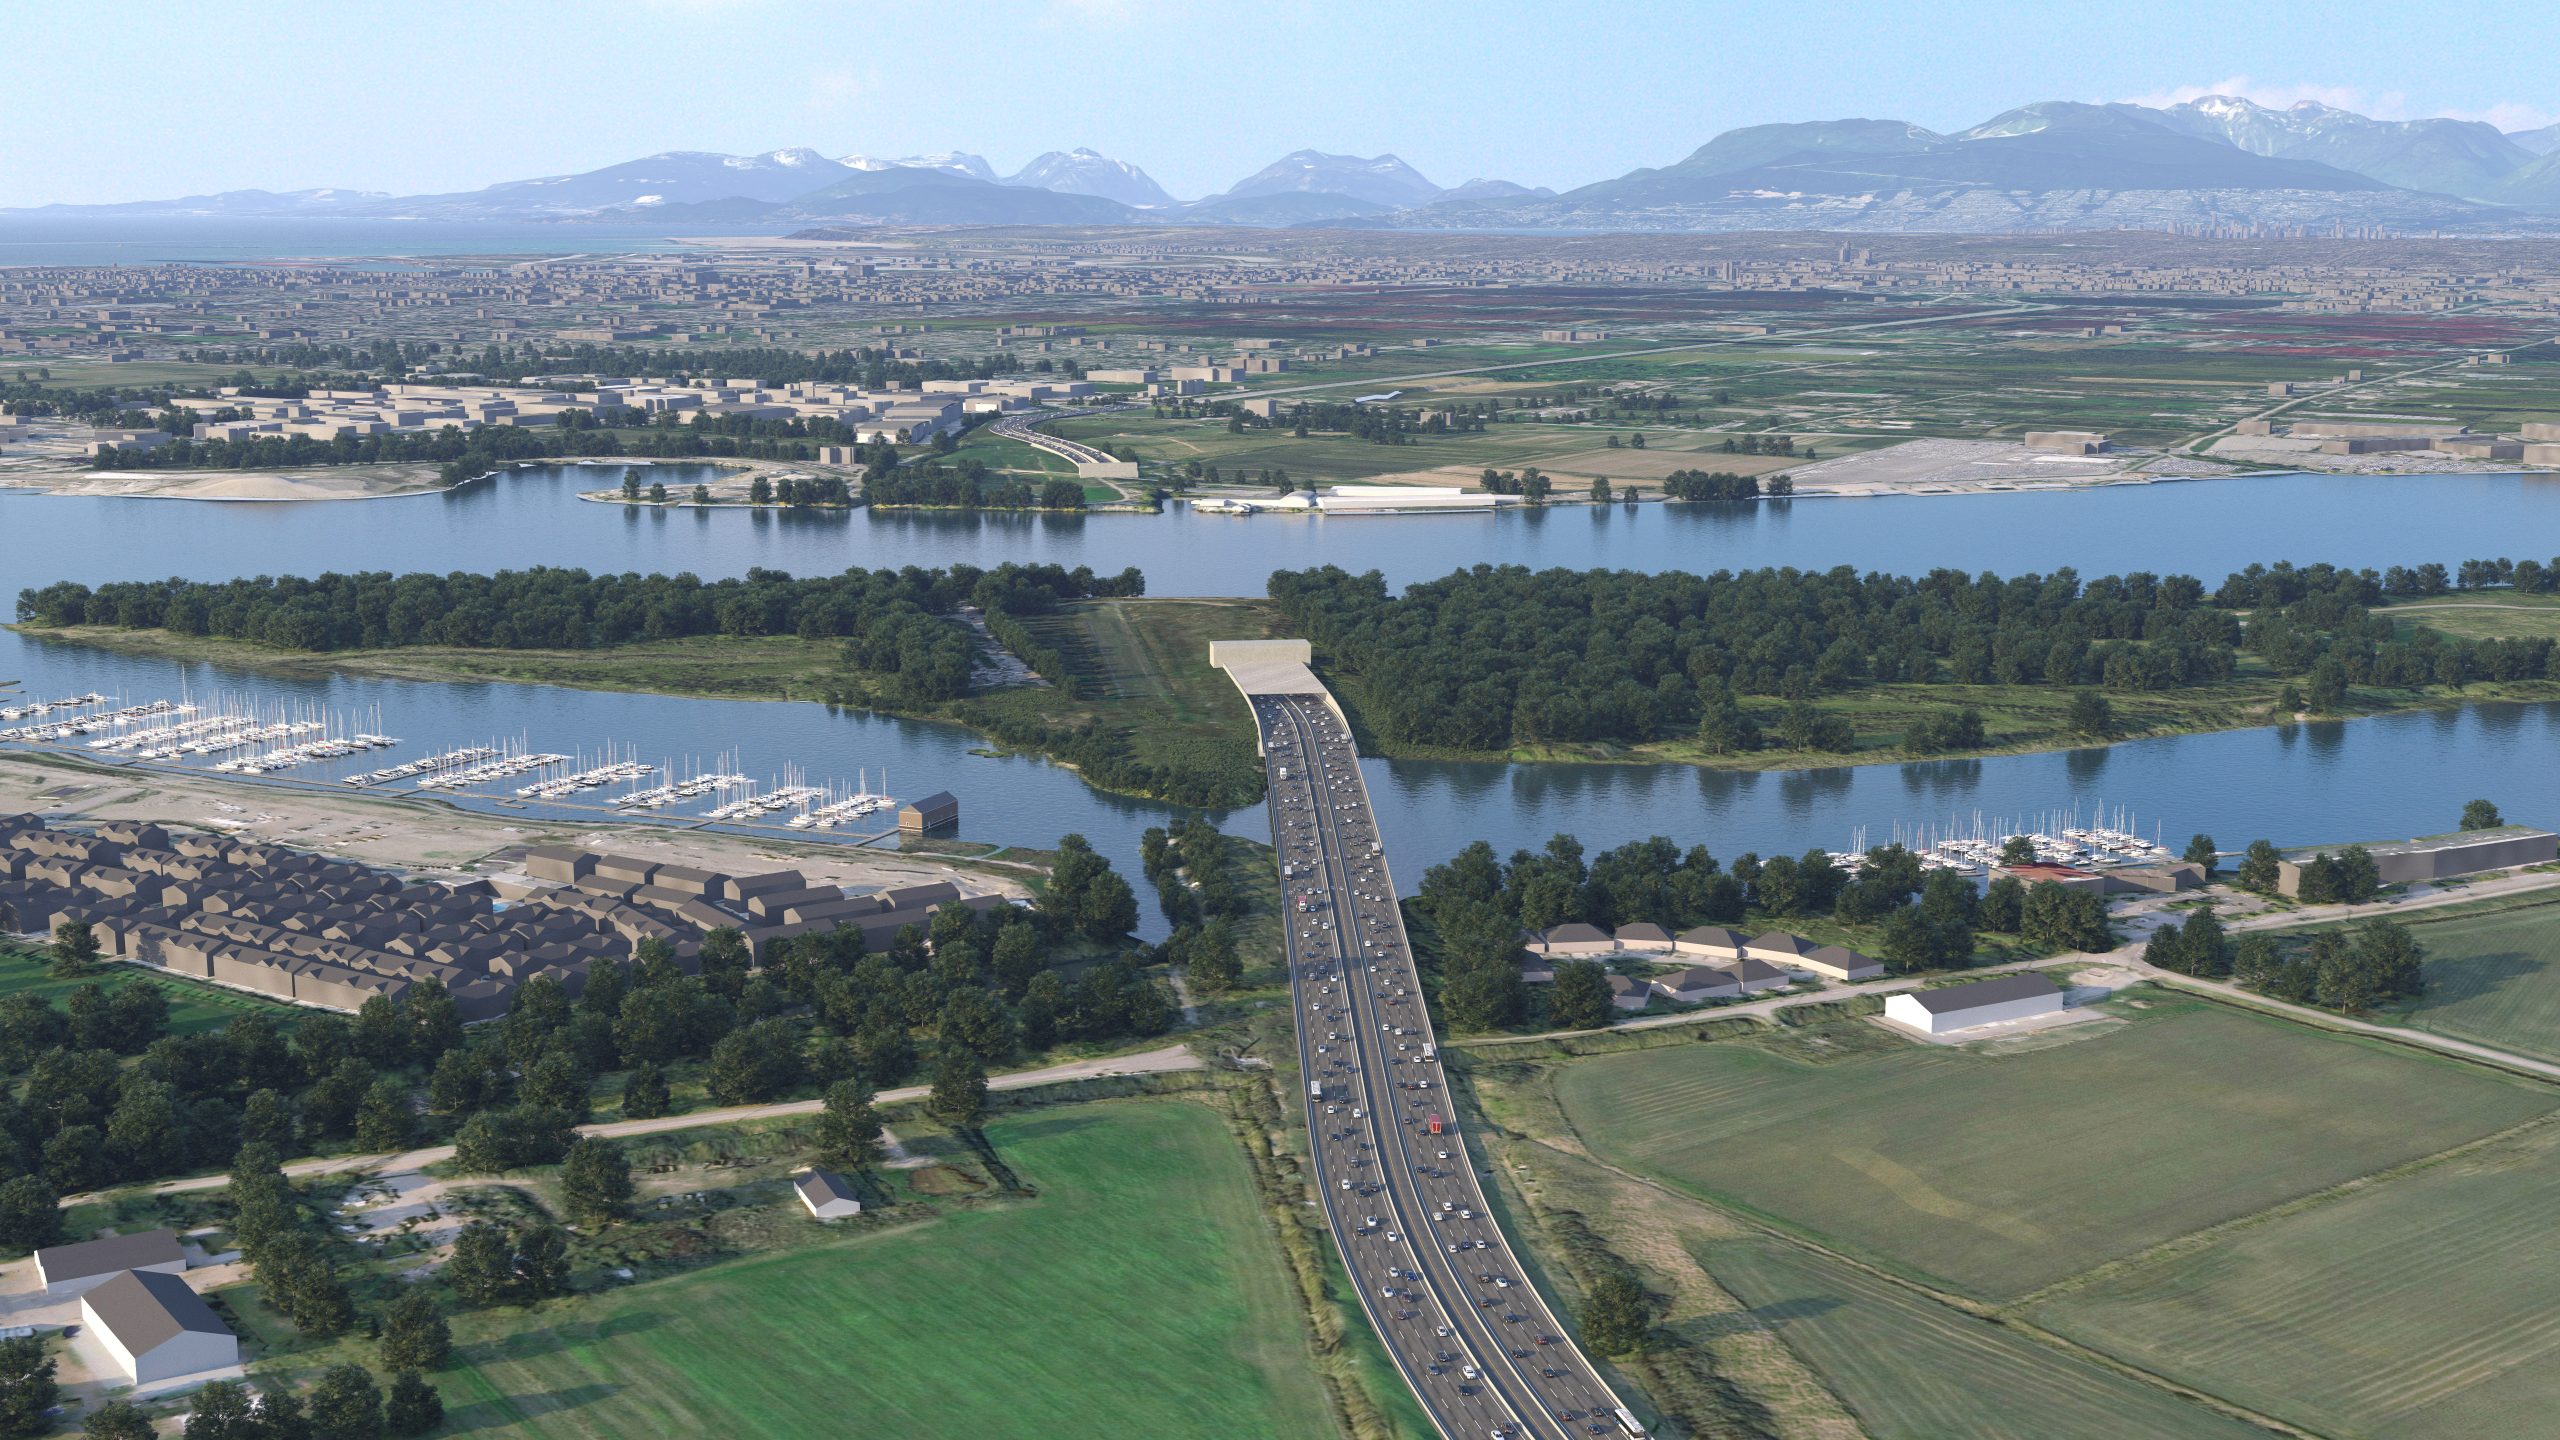 Conceptual aerial rendering of the new eight-lane immersed tube tunnel. Viewpoint from Delta, facing north with the mountains in the background. Rendering shows the new Deas Slough Bridge which transitions to the new tunnel, travels underneath the Fraser River and then connects to the existing Highway 99 in Richmond. Vehicles are shown on the south tunnel approach.

